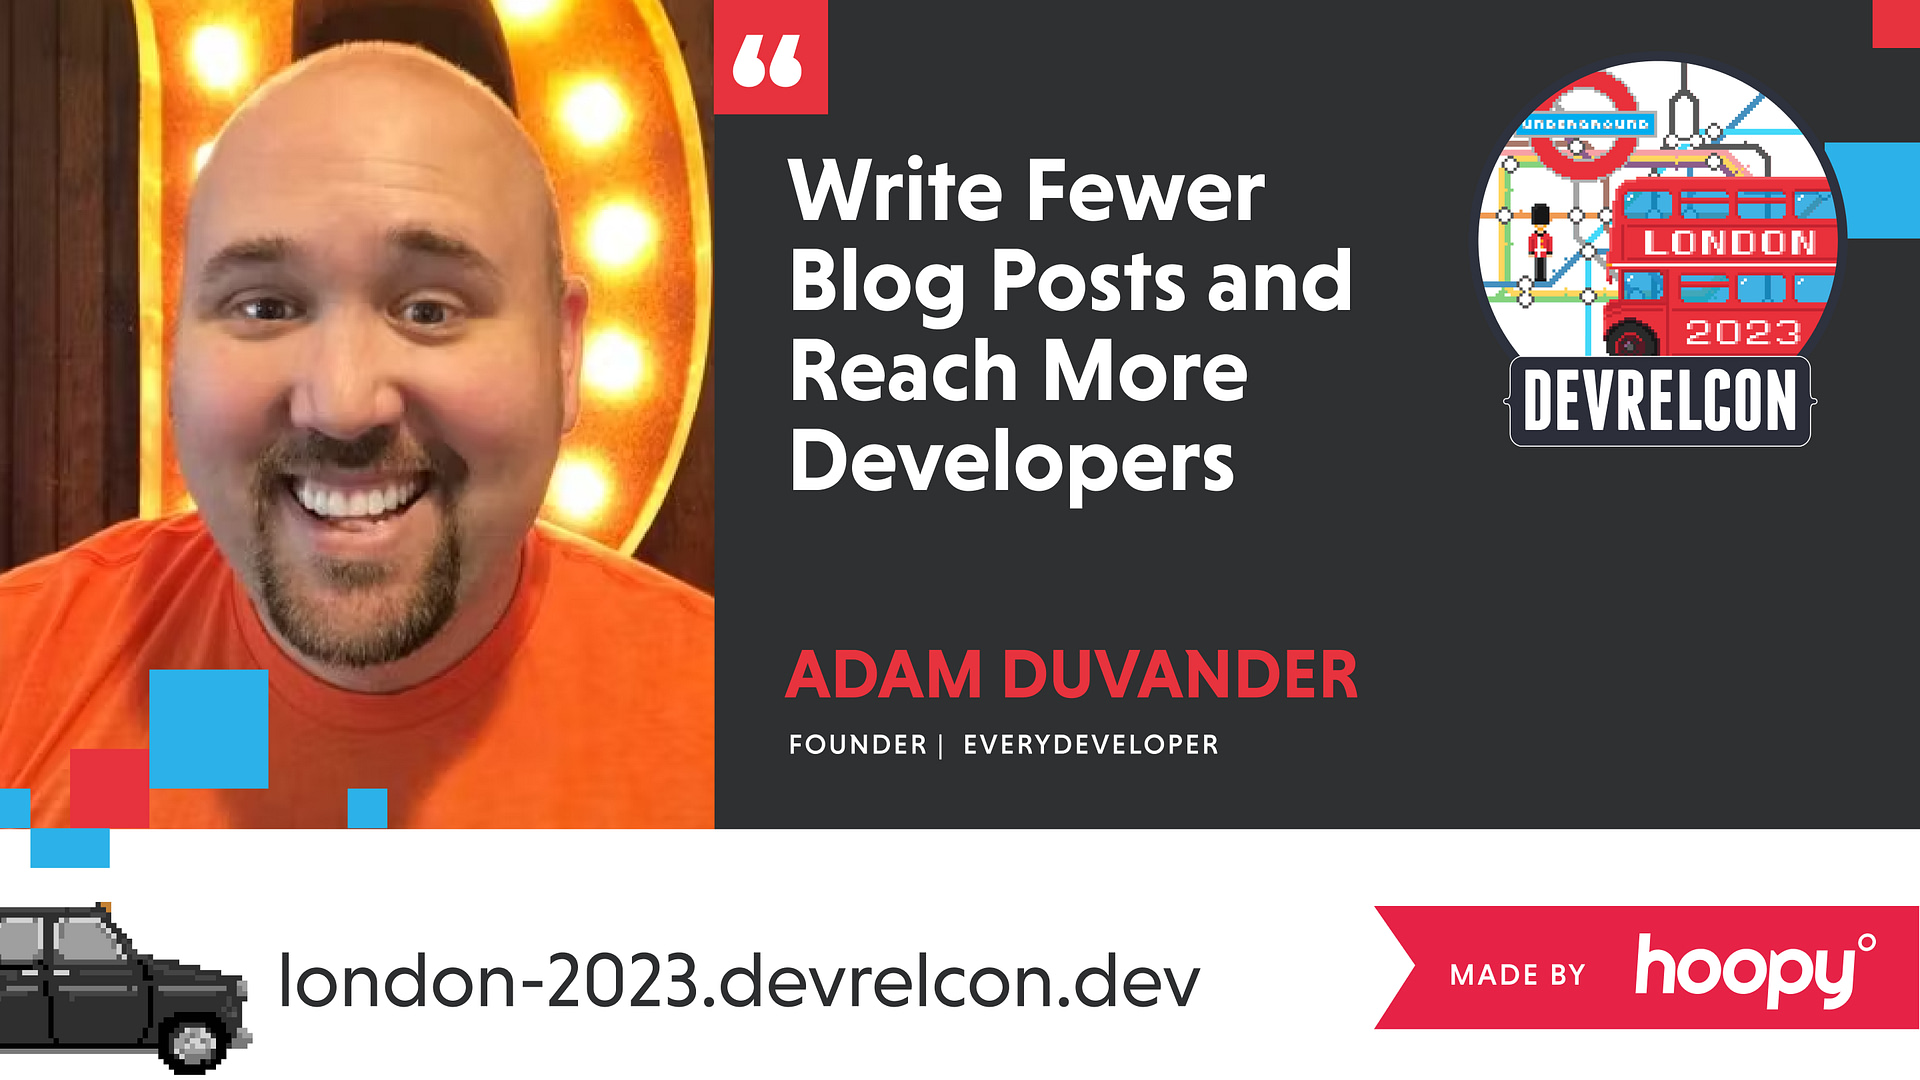 The image is a promotional graphic for Adam DuVander's presentation at DevRelCon London 2023. It features a cheerful photo of Adam DuVander, wearing an orange shirt, smiling broadly, and standing in front of a lighted circular background. The text next to him reads "Write Fewer Blog Posts and Reach More Developers," suggesting that his talk will focus on efficient content strategies for engaging a developer audience. Adam DuVander is identified as the Founder of EveryDeveloper. The graphic also includes the DevRelCon logo with iconic London imagery and the year 2023. The URL "london-2023.devrelcon.dev" is at the bottom, along with the Hoopy logo, indicating that Hoopy created the graphic or is a sponsor of the event. The design is upbeat and aligns with the theme of developer relations and content marketing.